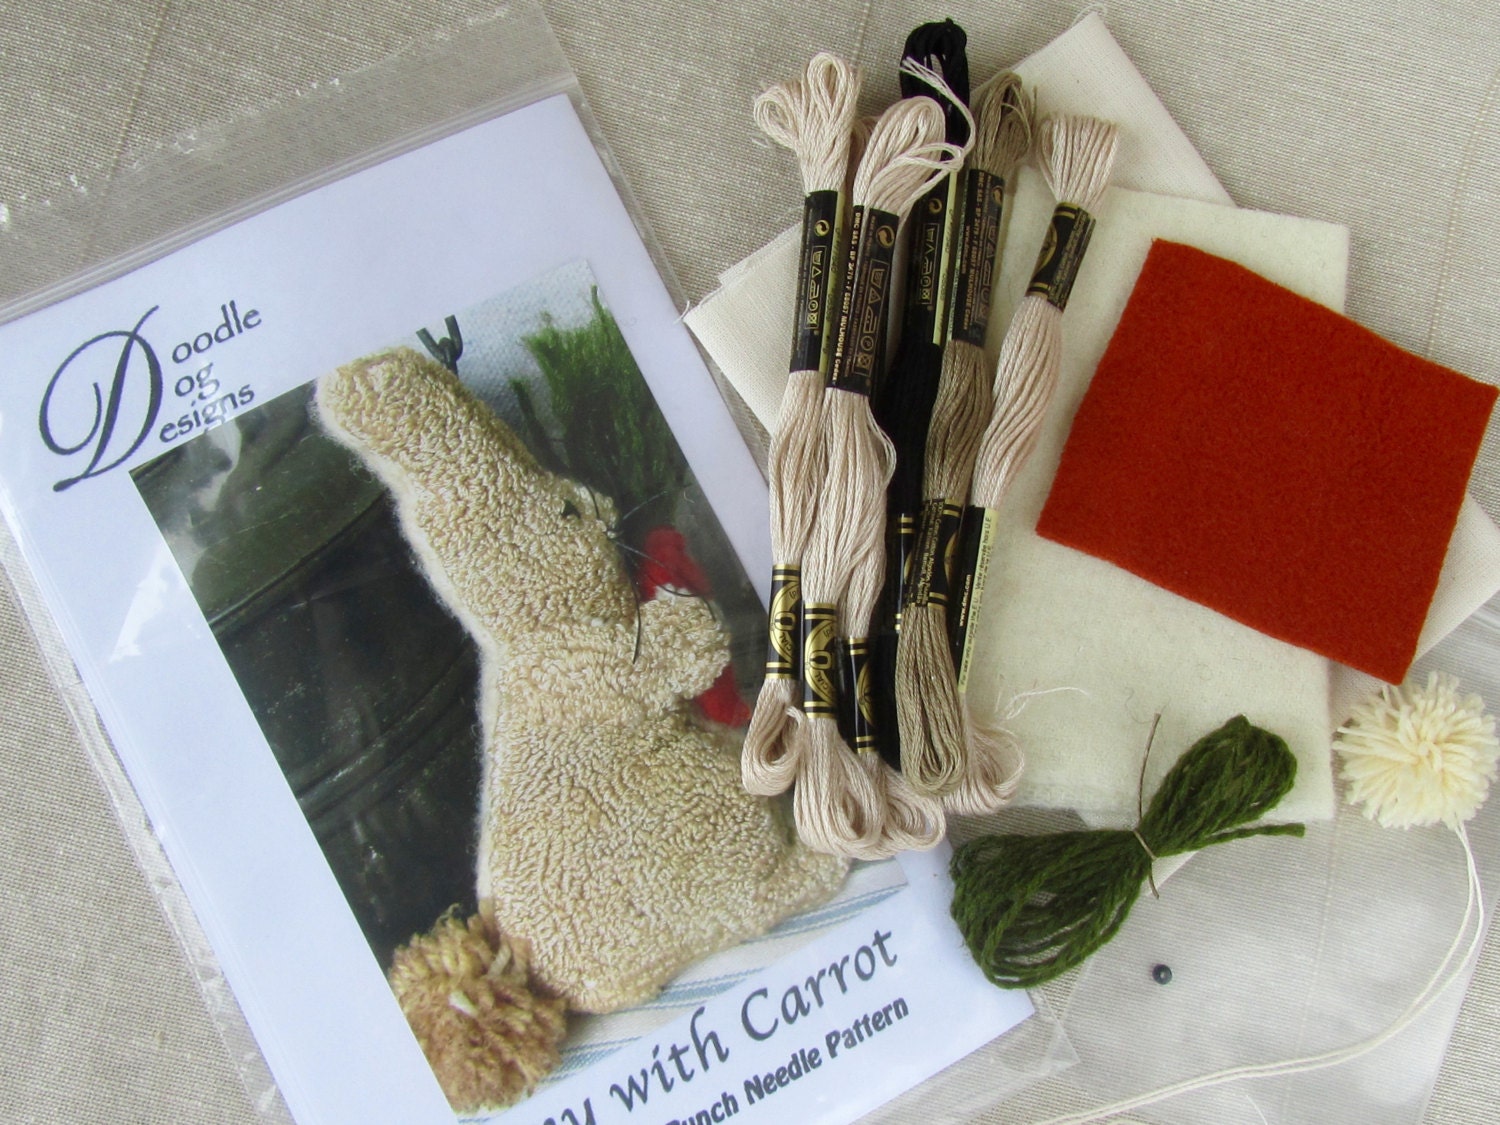 Whale Punch Needle Kit With Adjustable Punch Needle Kit for